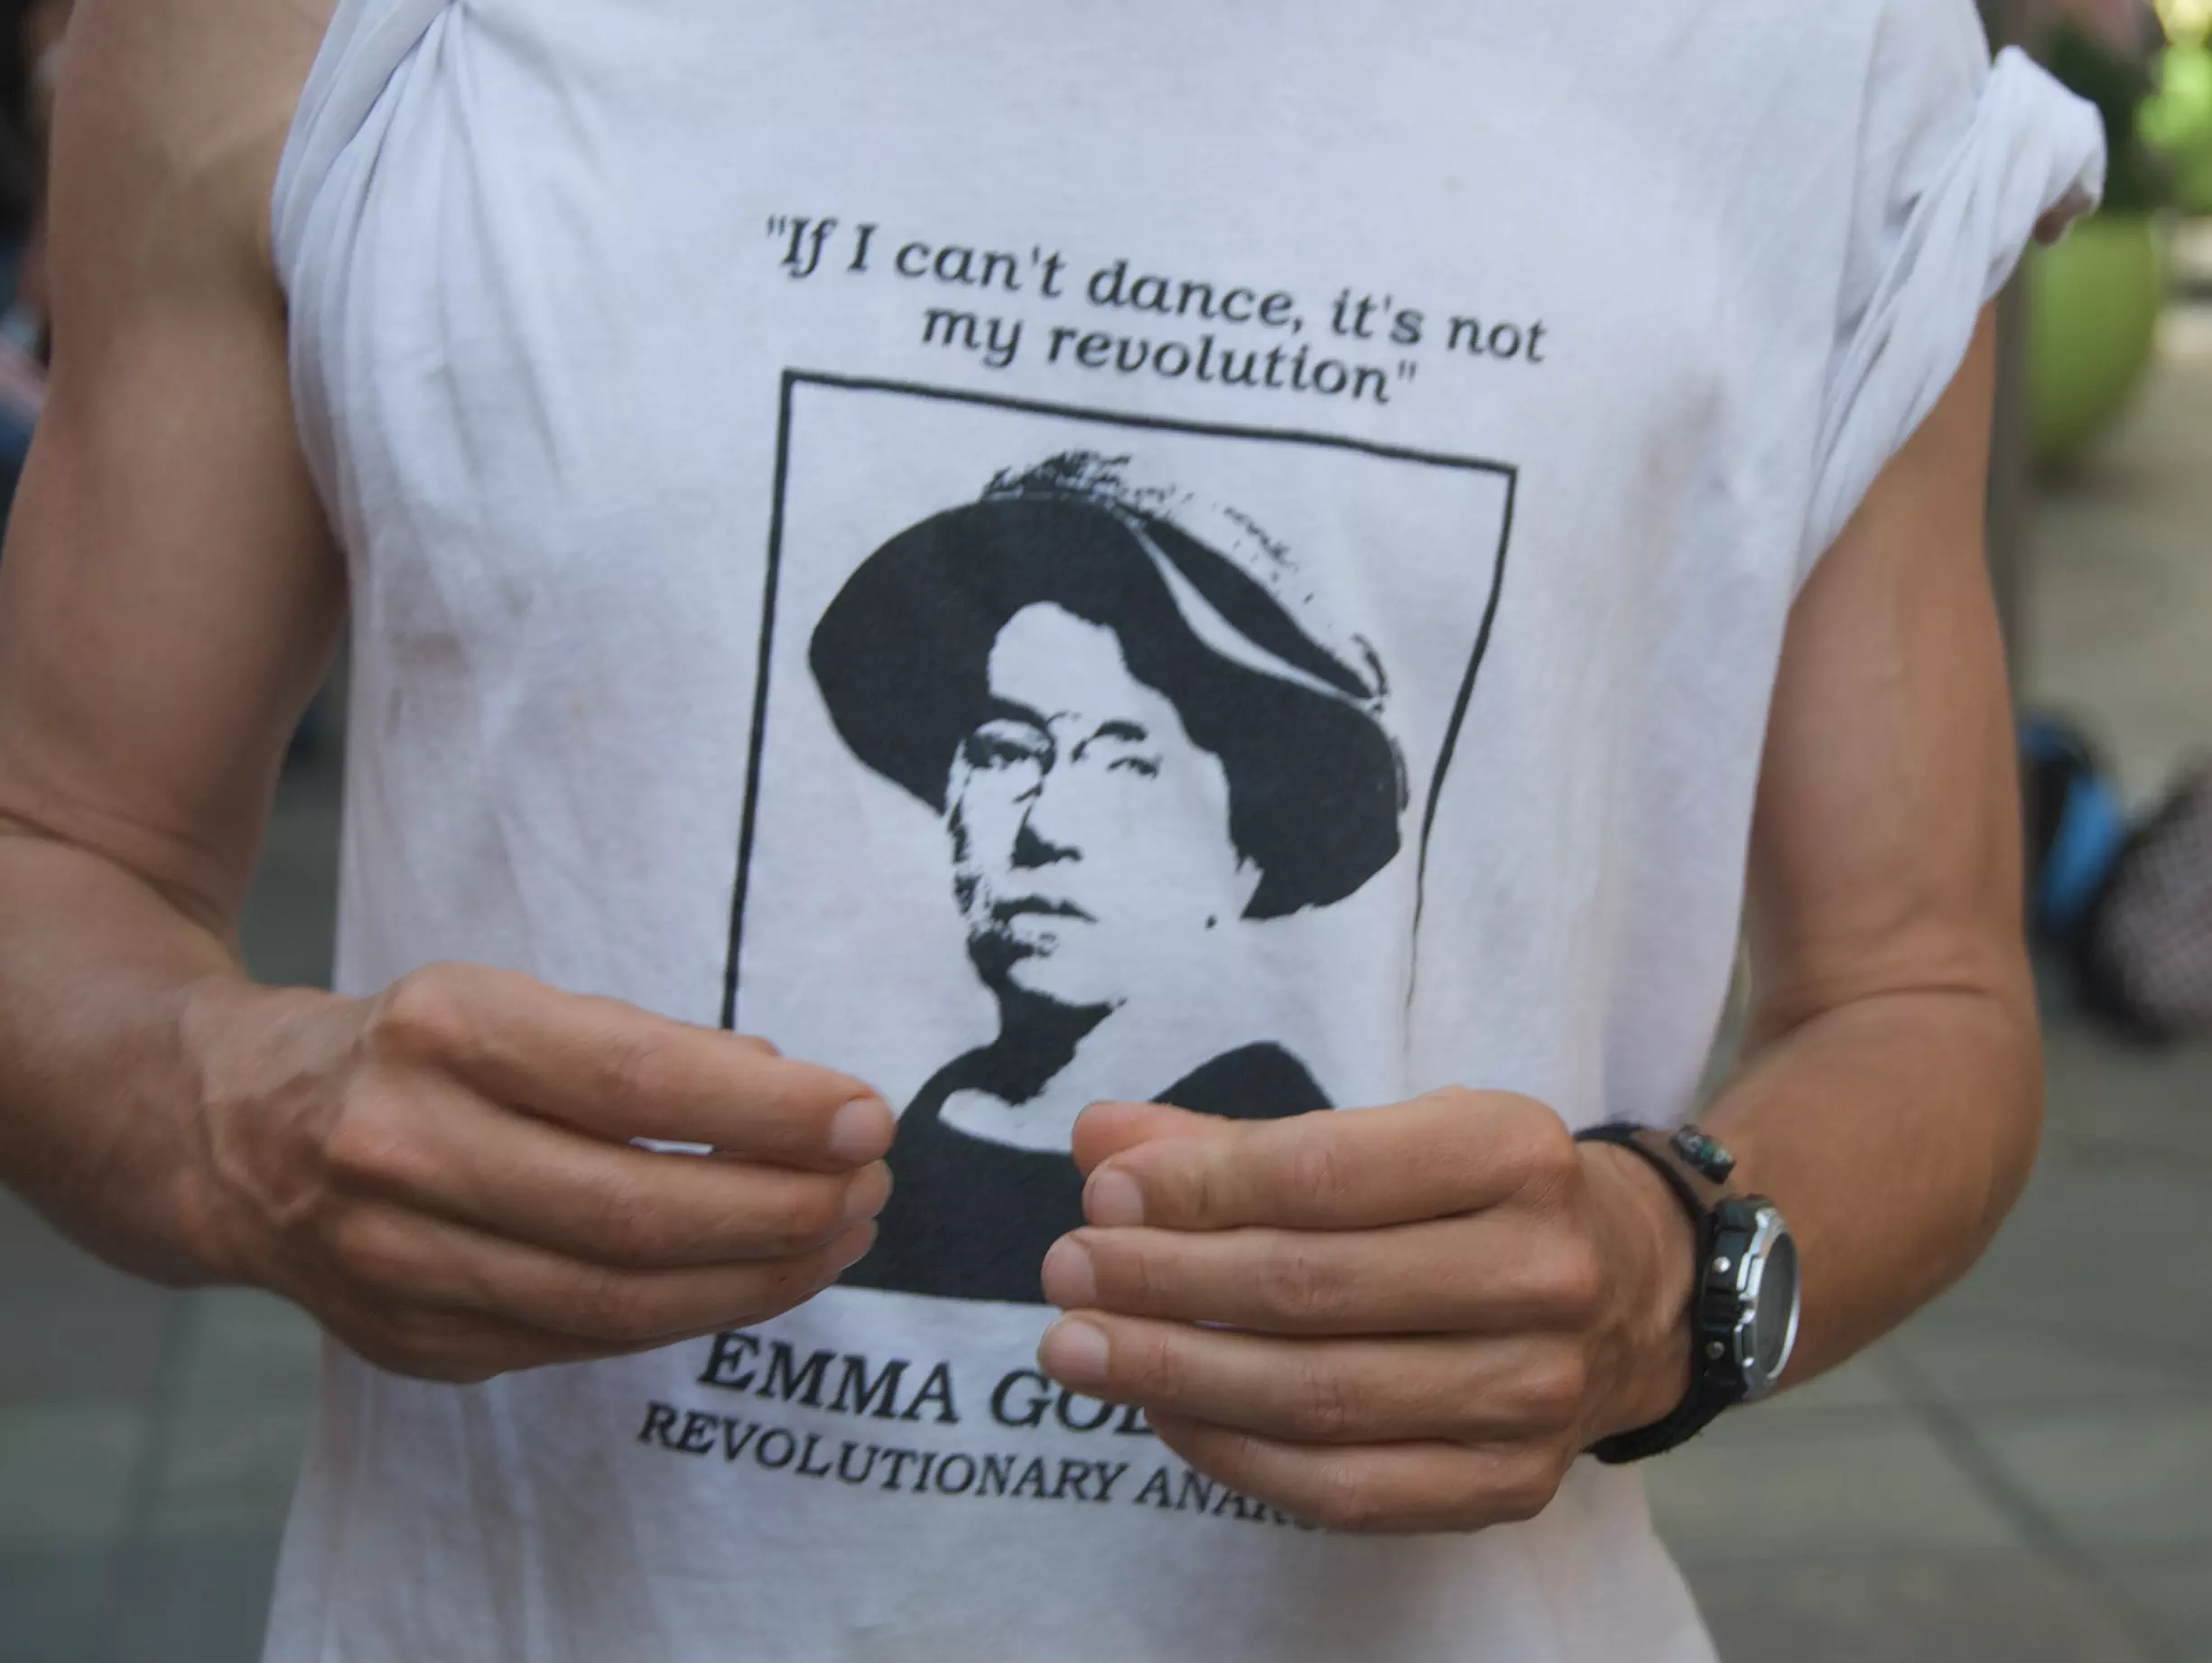 If I can't dance, it's not my revolution - Quote by Emma Goldman. Photo of t-shirt with slogan. Photo: Taken on August 24, 2008 by Steve Rhodes. (CC BY-NC-SA 2.0).